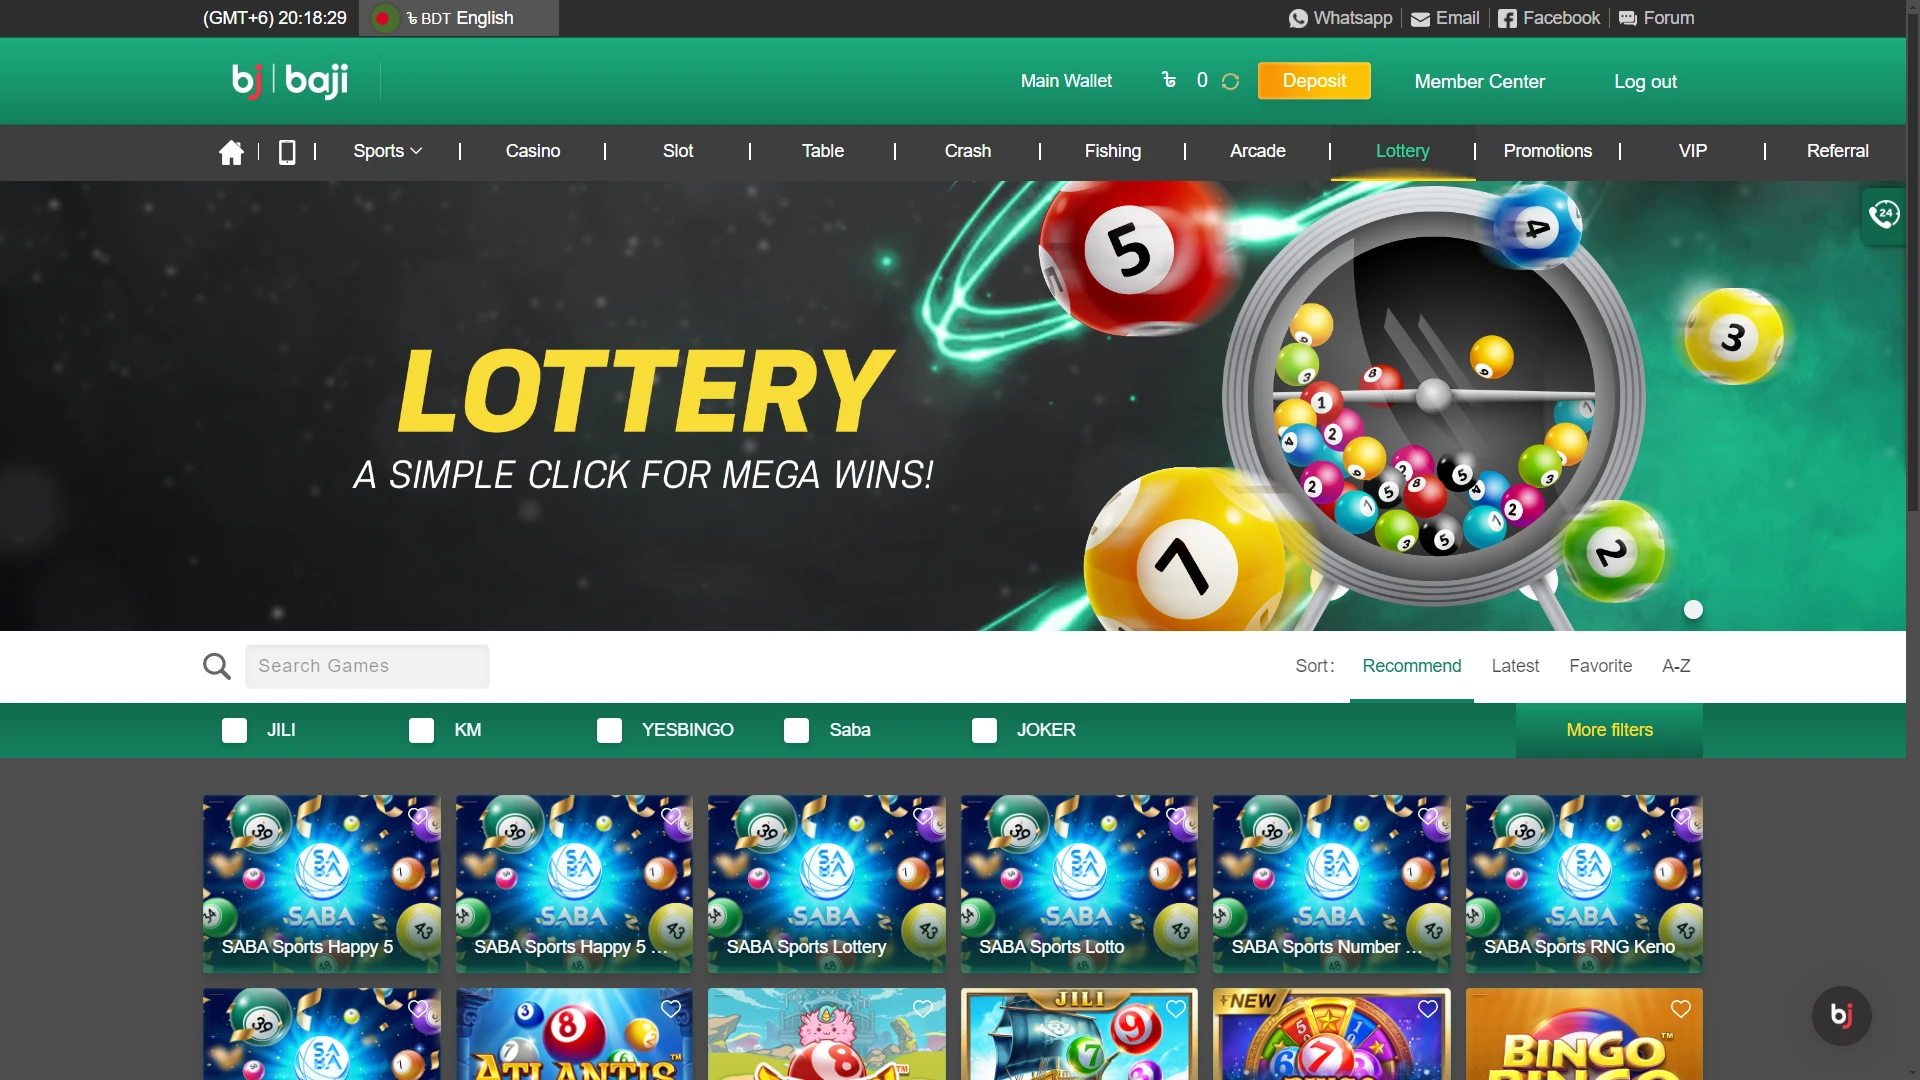 Now you should choose one of the lottery games on the Baji website.